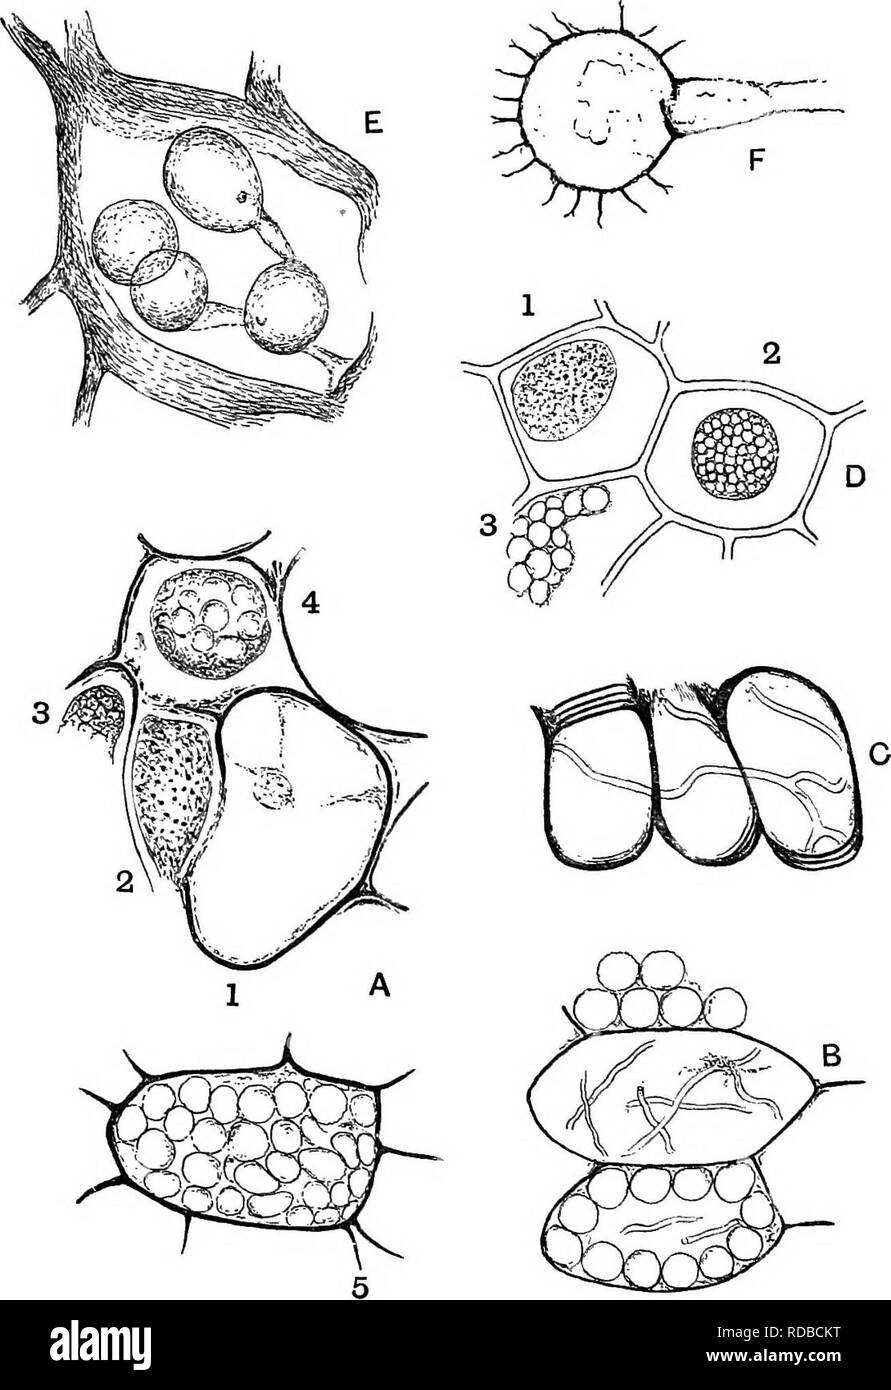 . Fossil plants : for students of botany and geology . Paleobotany. 214 THALLOPHYTA. [CH.. Fig. 41. A. Cells of Gycadeoidea gigantea Sew. x 355. B and C. Parenchy- matous cells and scalariform traoheids of Osmundites Dowkeri Carr. x 230. D. Epidermal cells of Memecylon {MelastoTnaceae) with vacuolated contents. E. Peronosporites antiquarius Smith, (No. 1923 in the Williamson collection). X 230. F. Zygosporites. x 230. (A, B, C and E drawn from specimens in the British Museum; D from a drawing by Prof. Marshall Ward; F from a, specimen in the Botanical Laboratory Collection, Cambridge.). Please Stock Photo